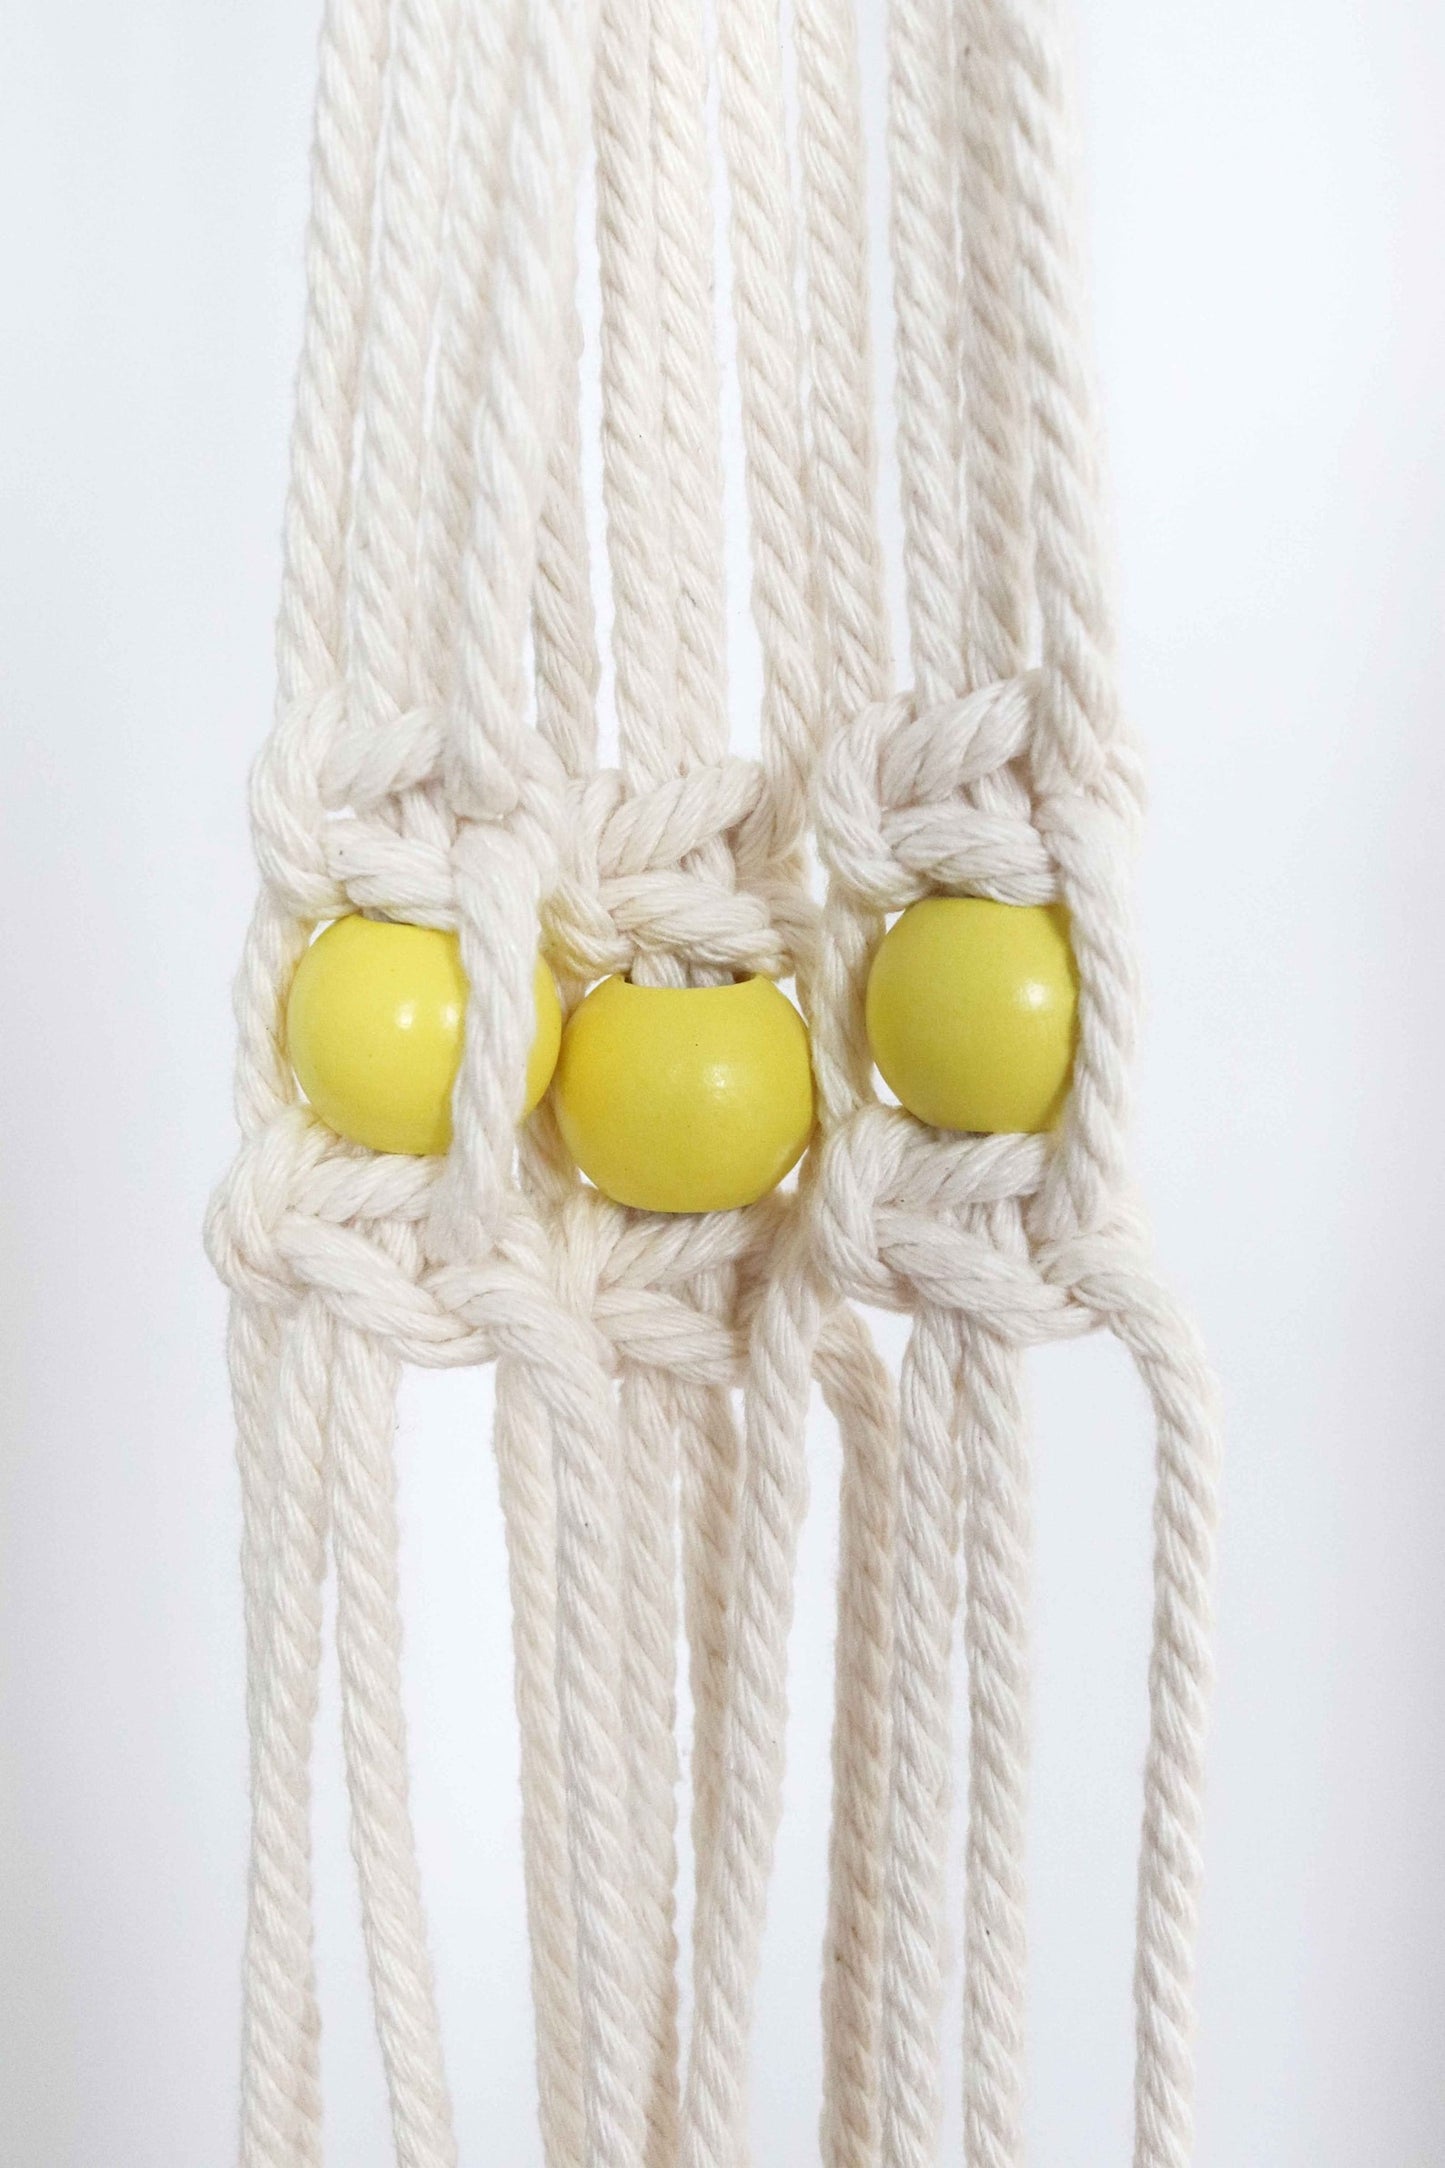 large hole beads for macrame on cotton rope